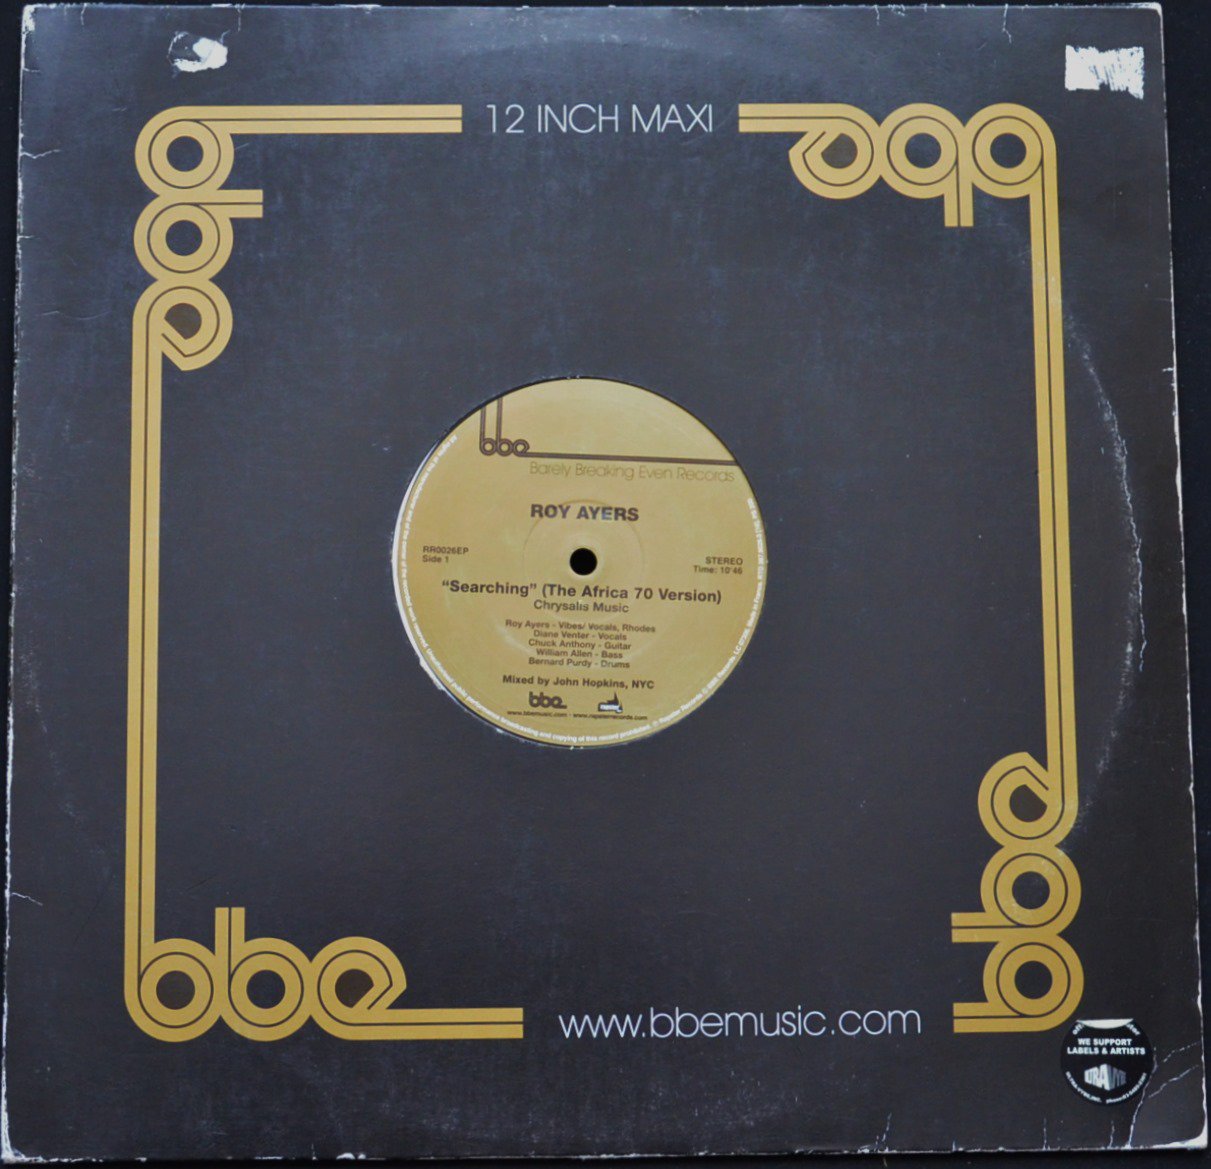 ROY AYERS / SEARCHING (THE AFRICA 70 VERSION) / BRAND NEW FEELING (12